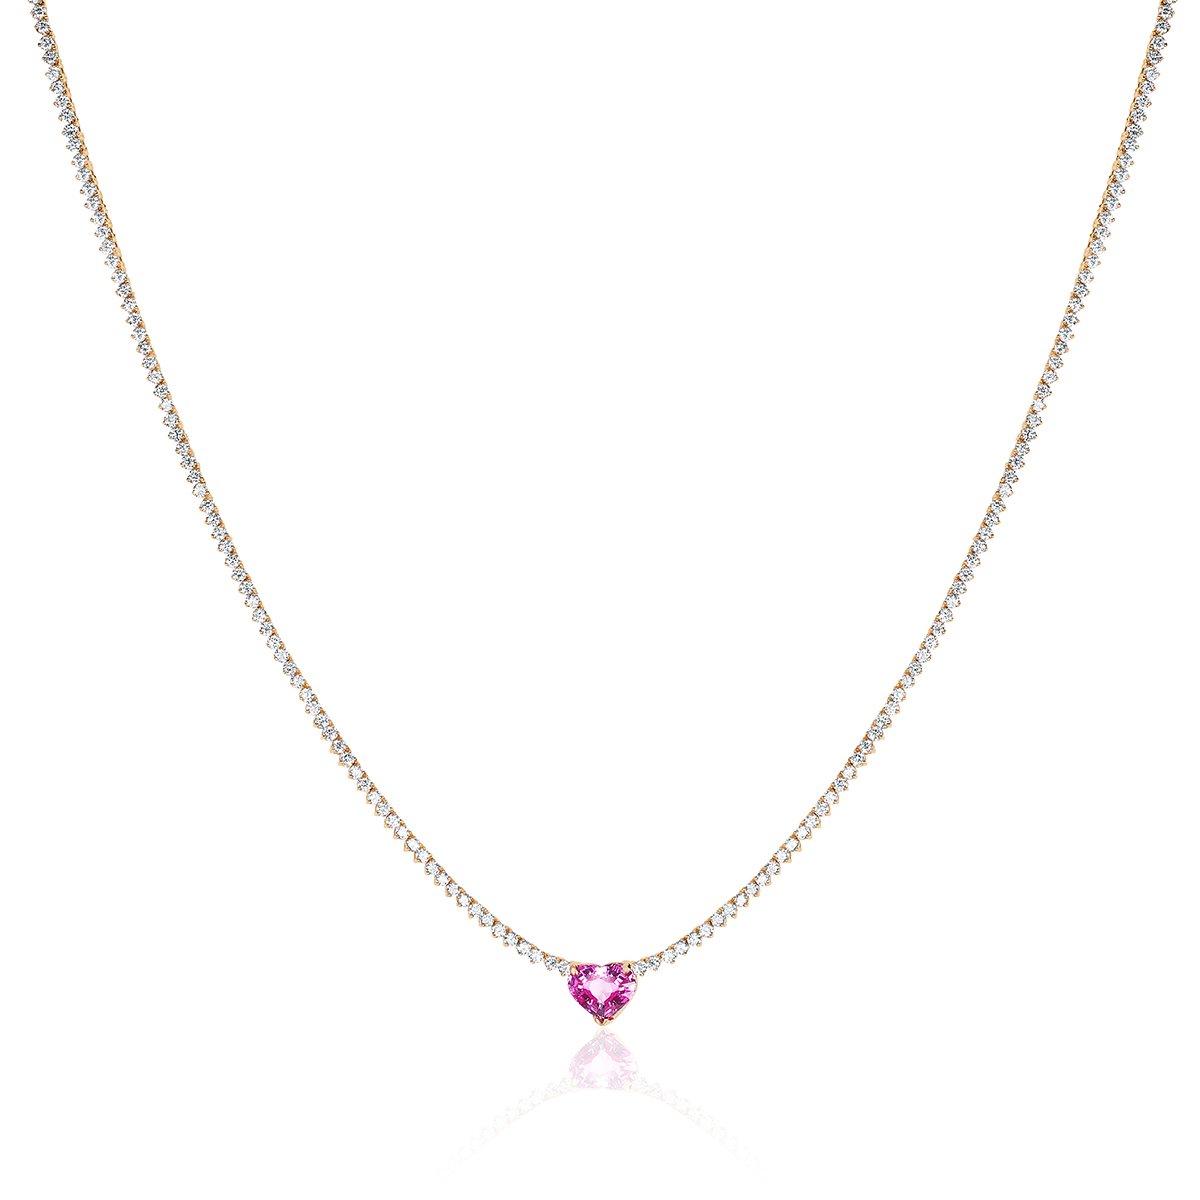 Louis Vuitton High Jewelry Pink Sapphire And Diamond Necklace Cost Best  Sale, SAVE 57%.